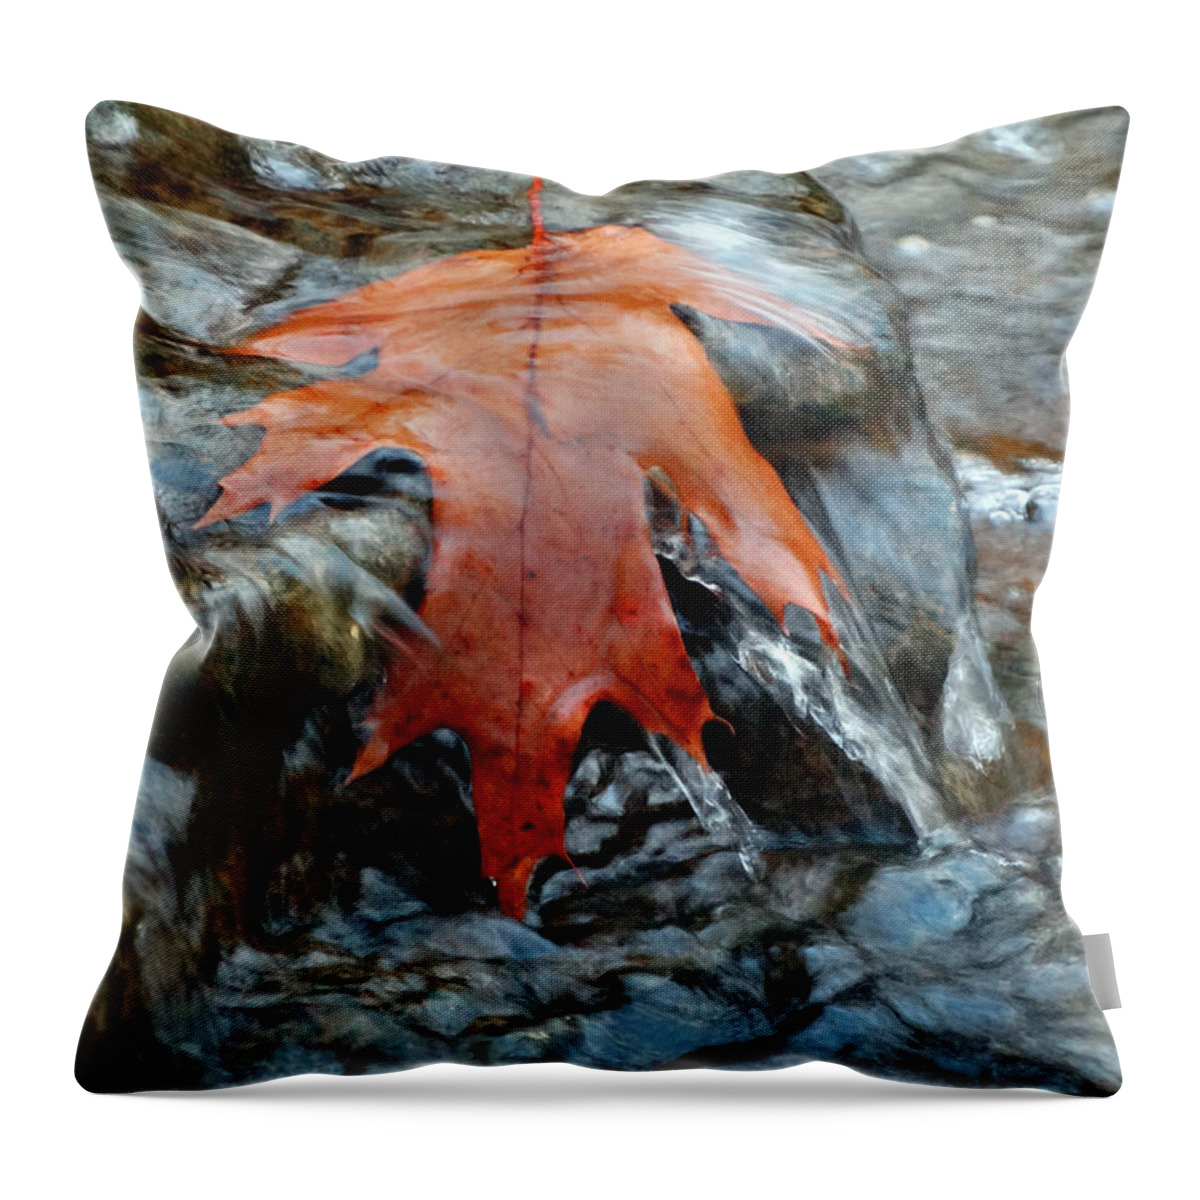 Waterfall Throw Pillow featuring the photograph Waterfall Leaf by David T Wilkinson